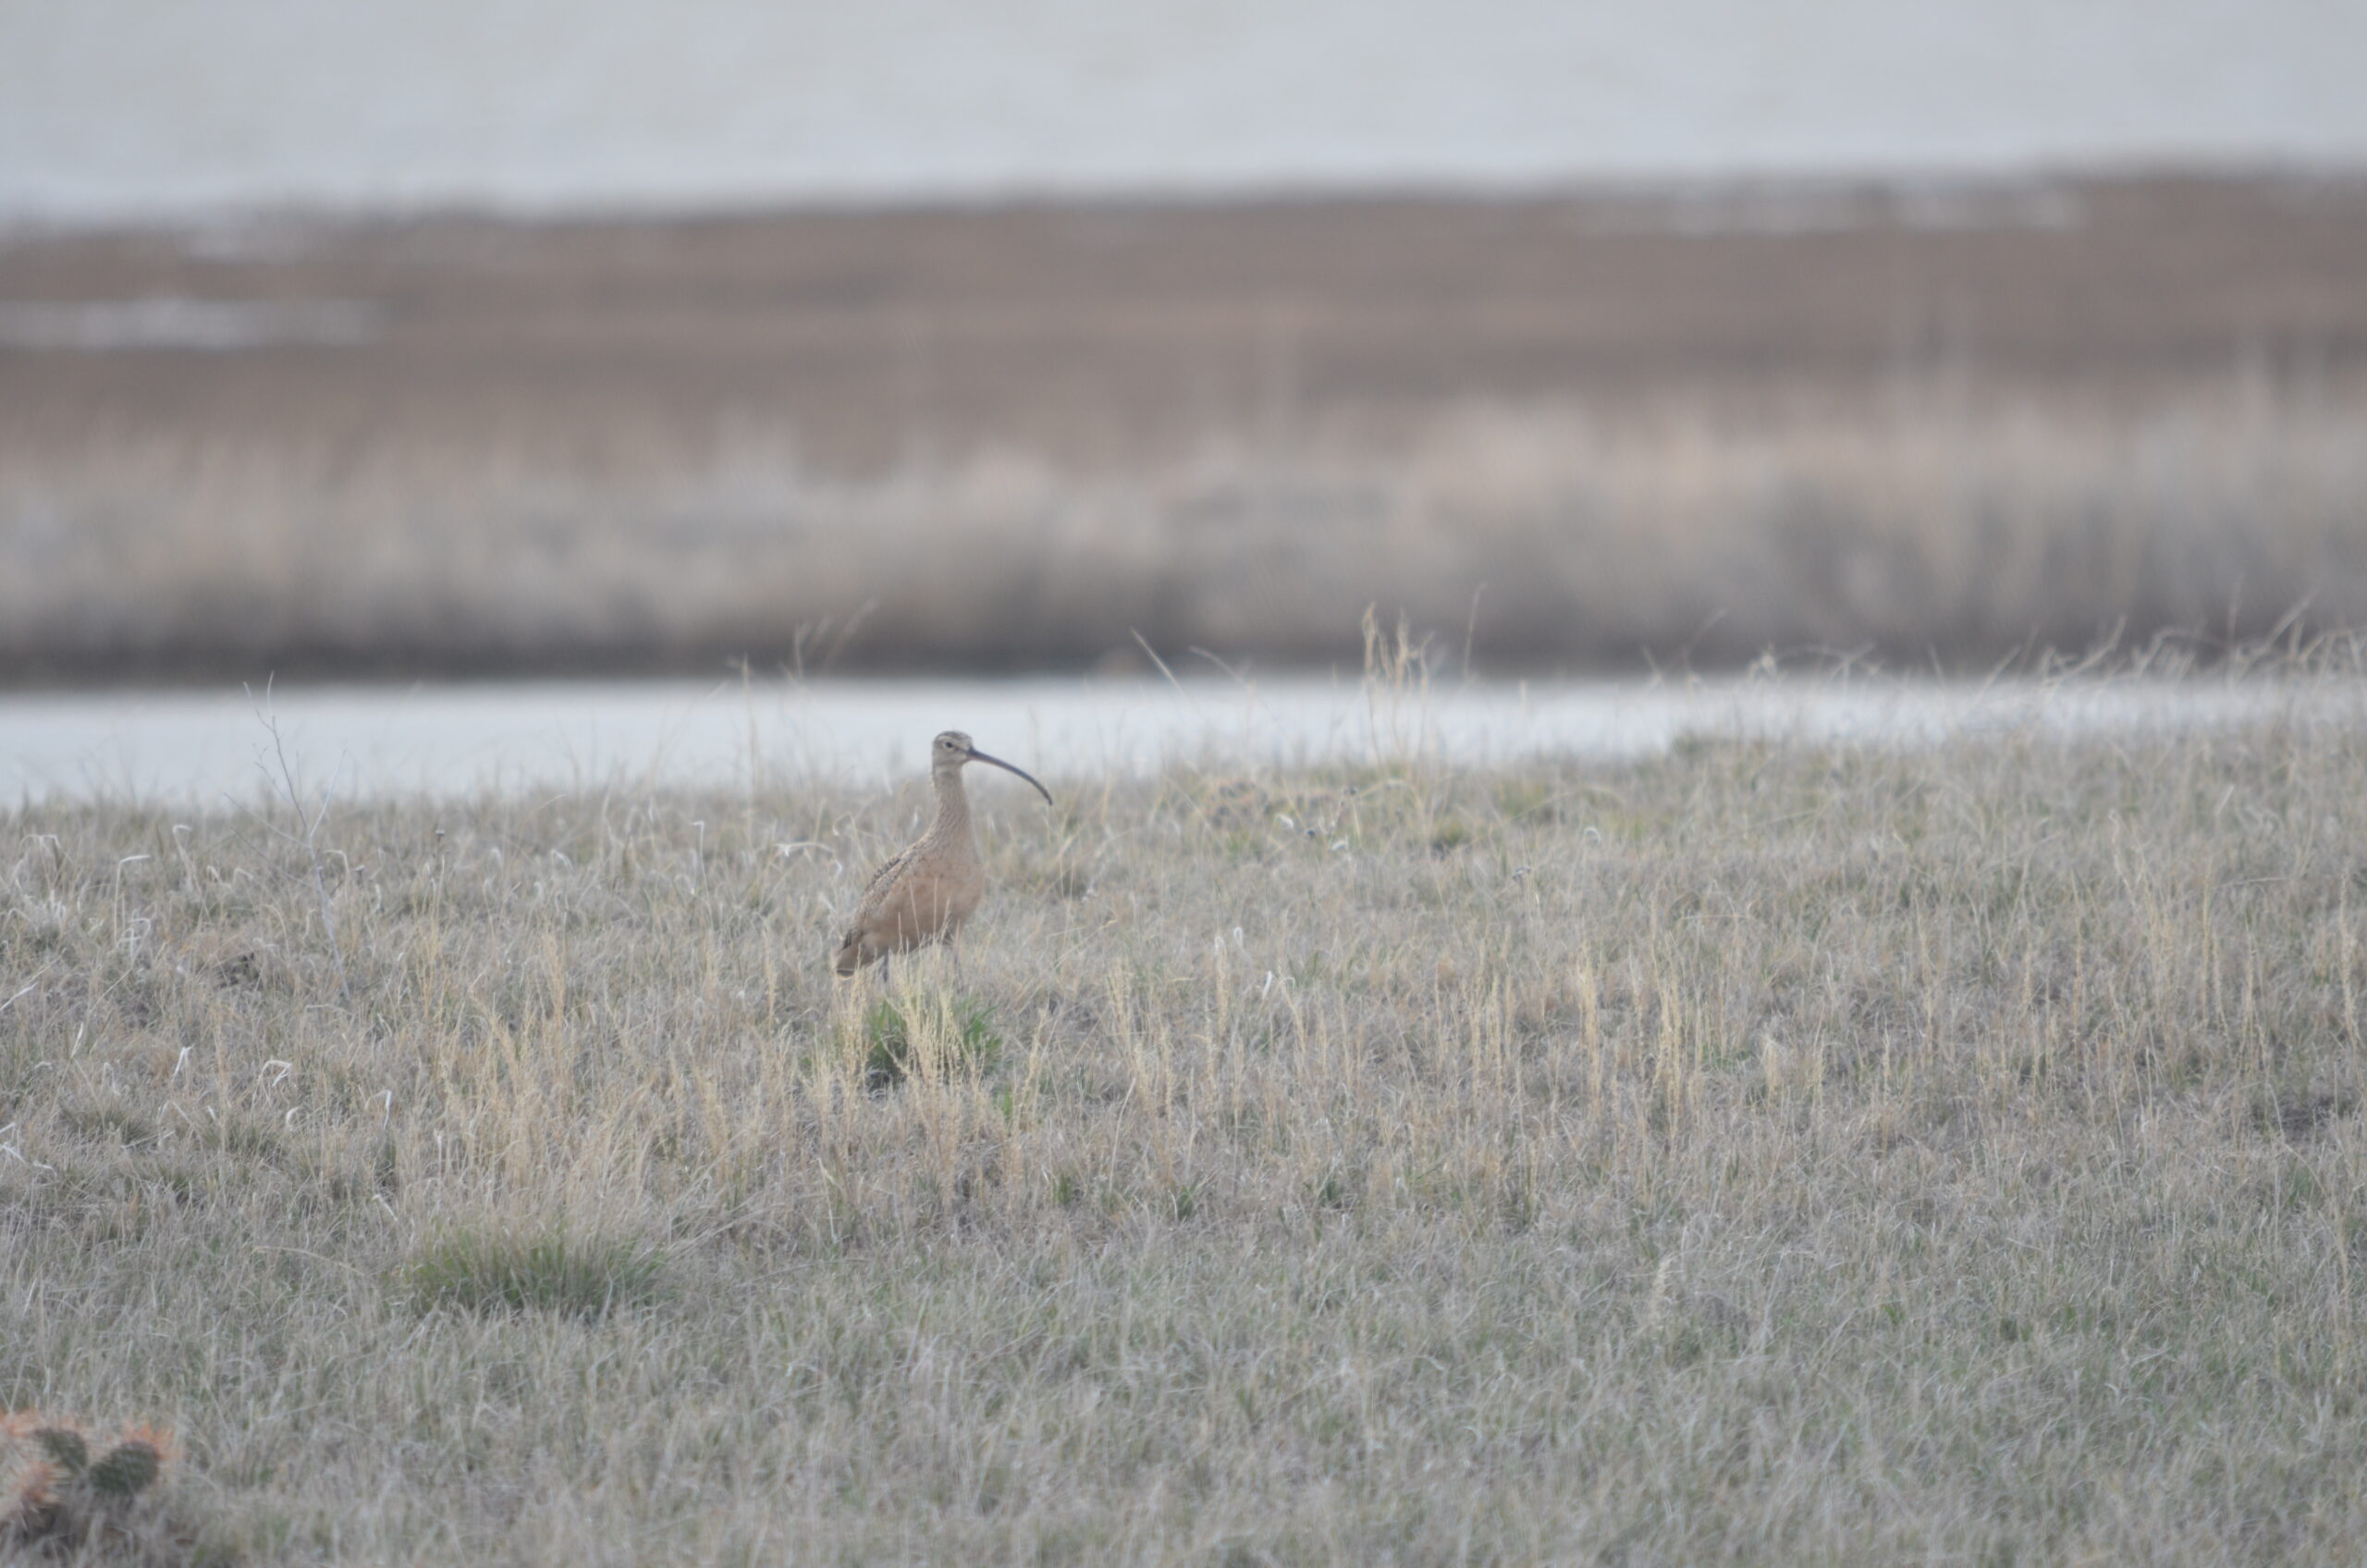 a wide shot shows a curlew standing alert in a grassy field. behind it the background is blurred, but hints at a body of water and more grassland into the distance